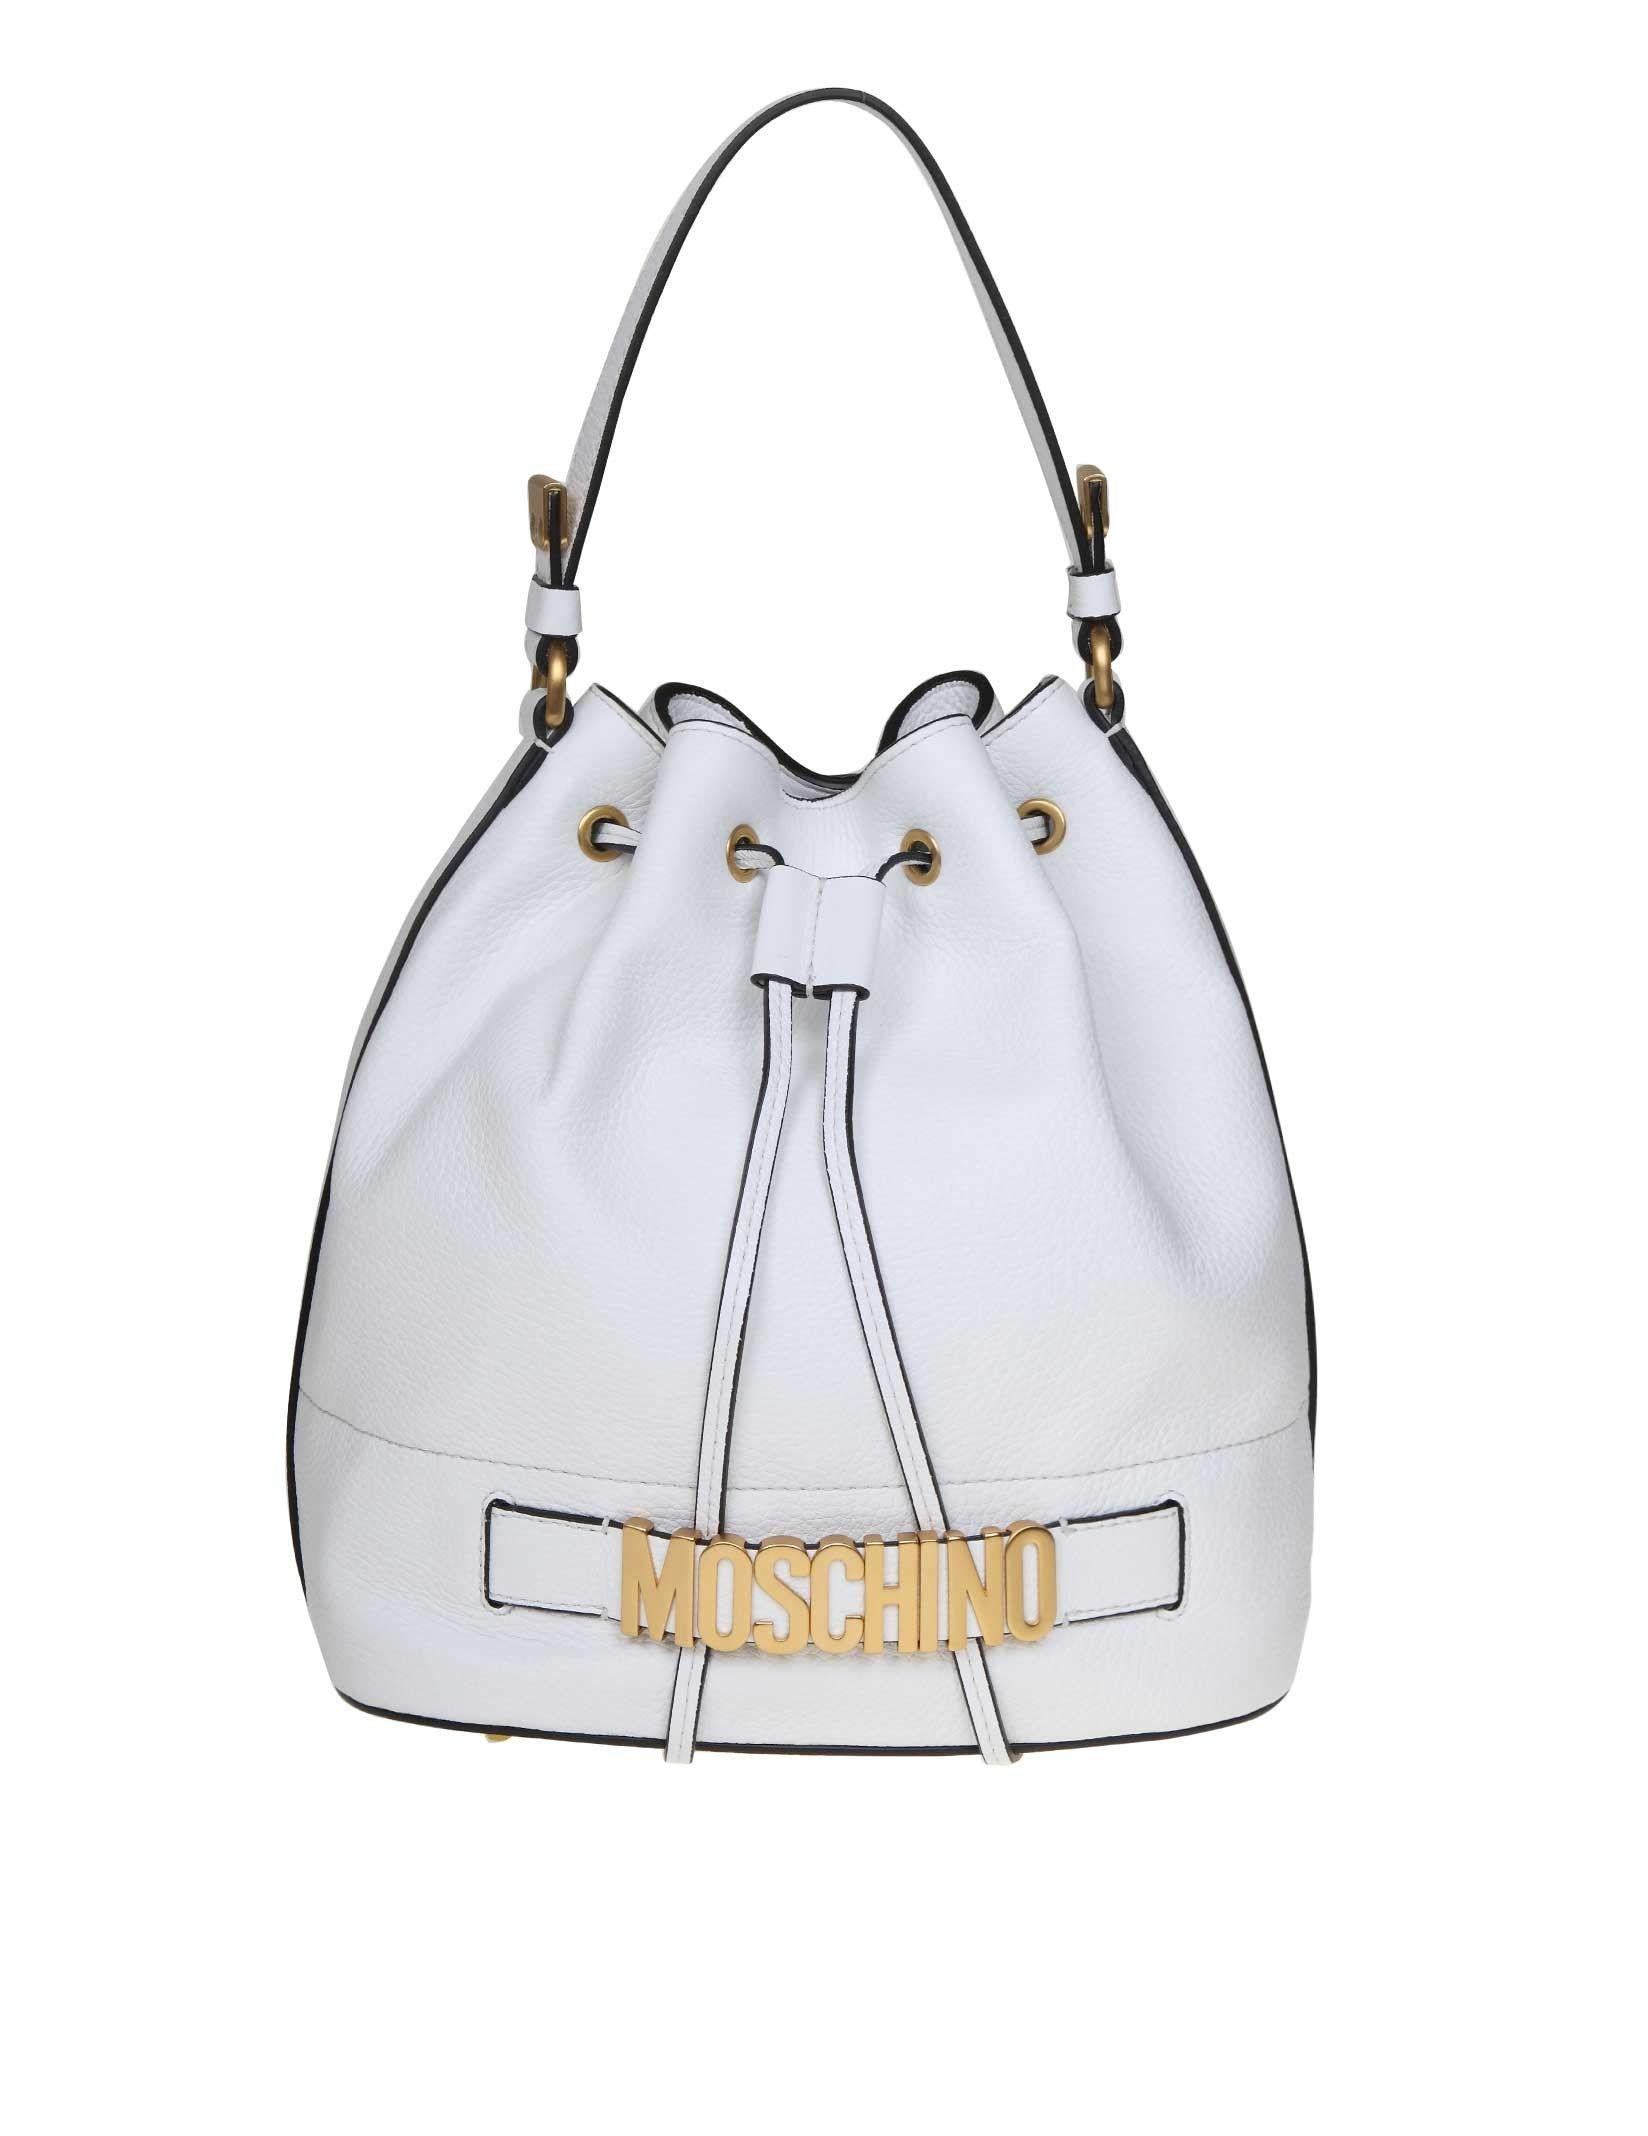 Moschino White Leather Shoulder Bag - Lyst